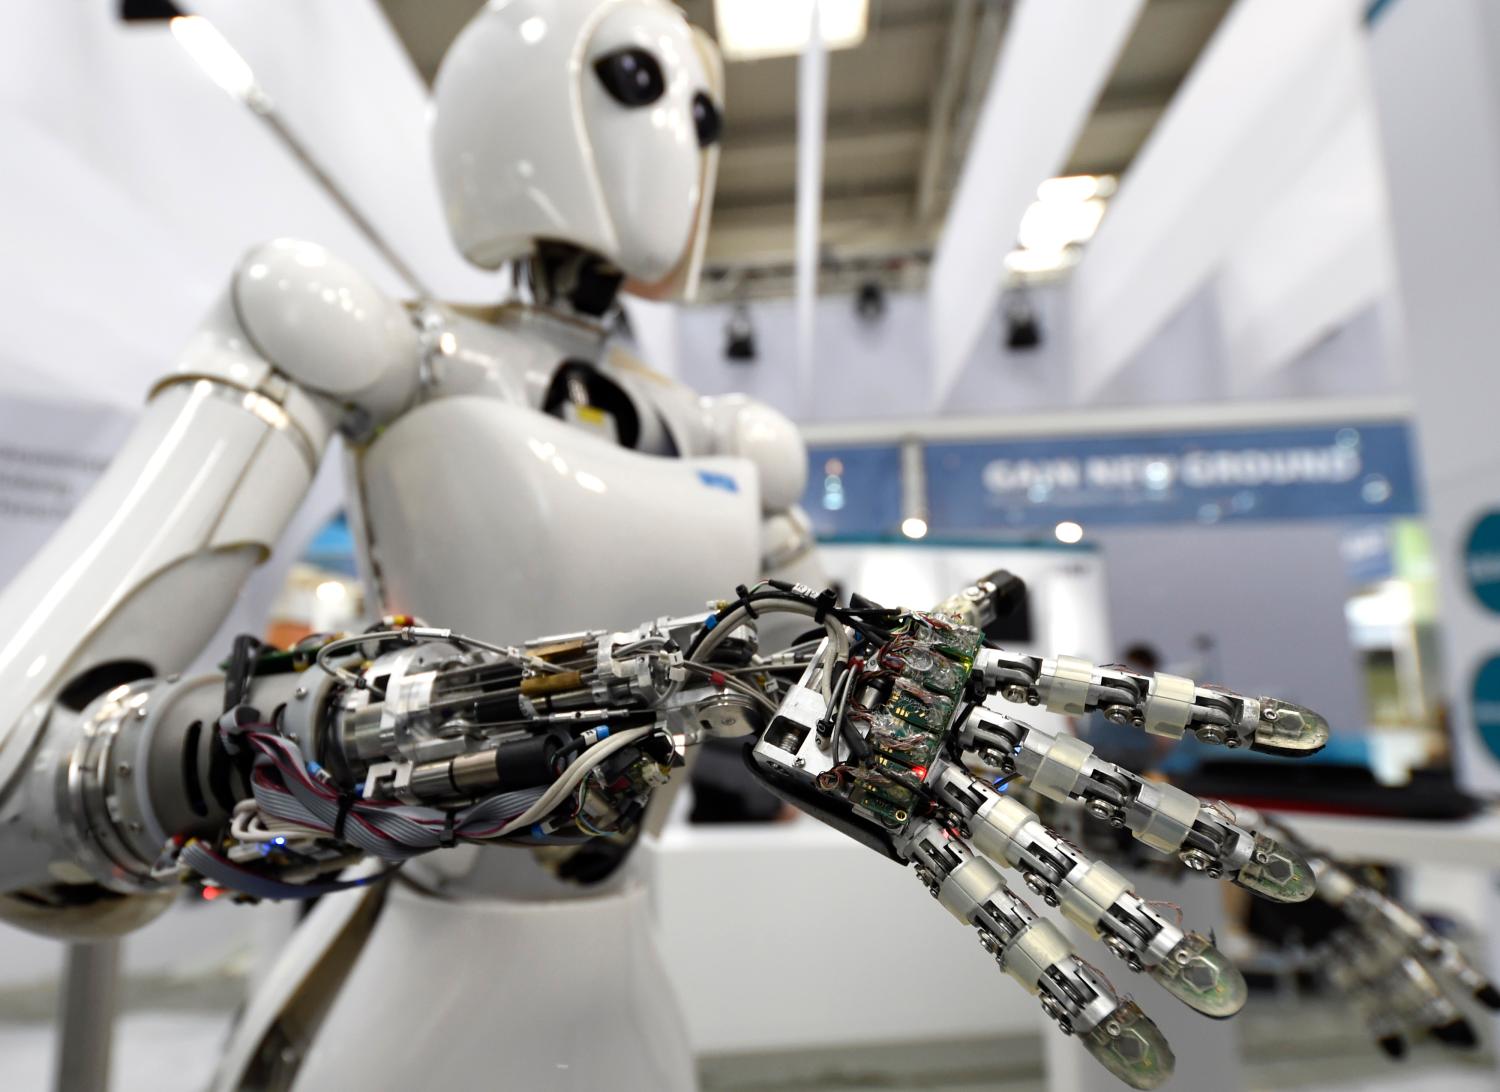 Brookings survey finds 52 percent believe robots will perform most